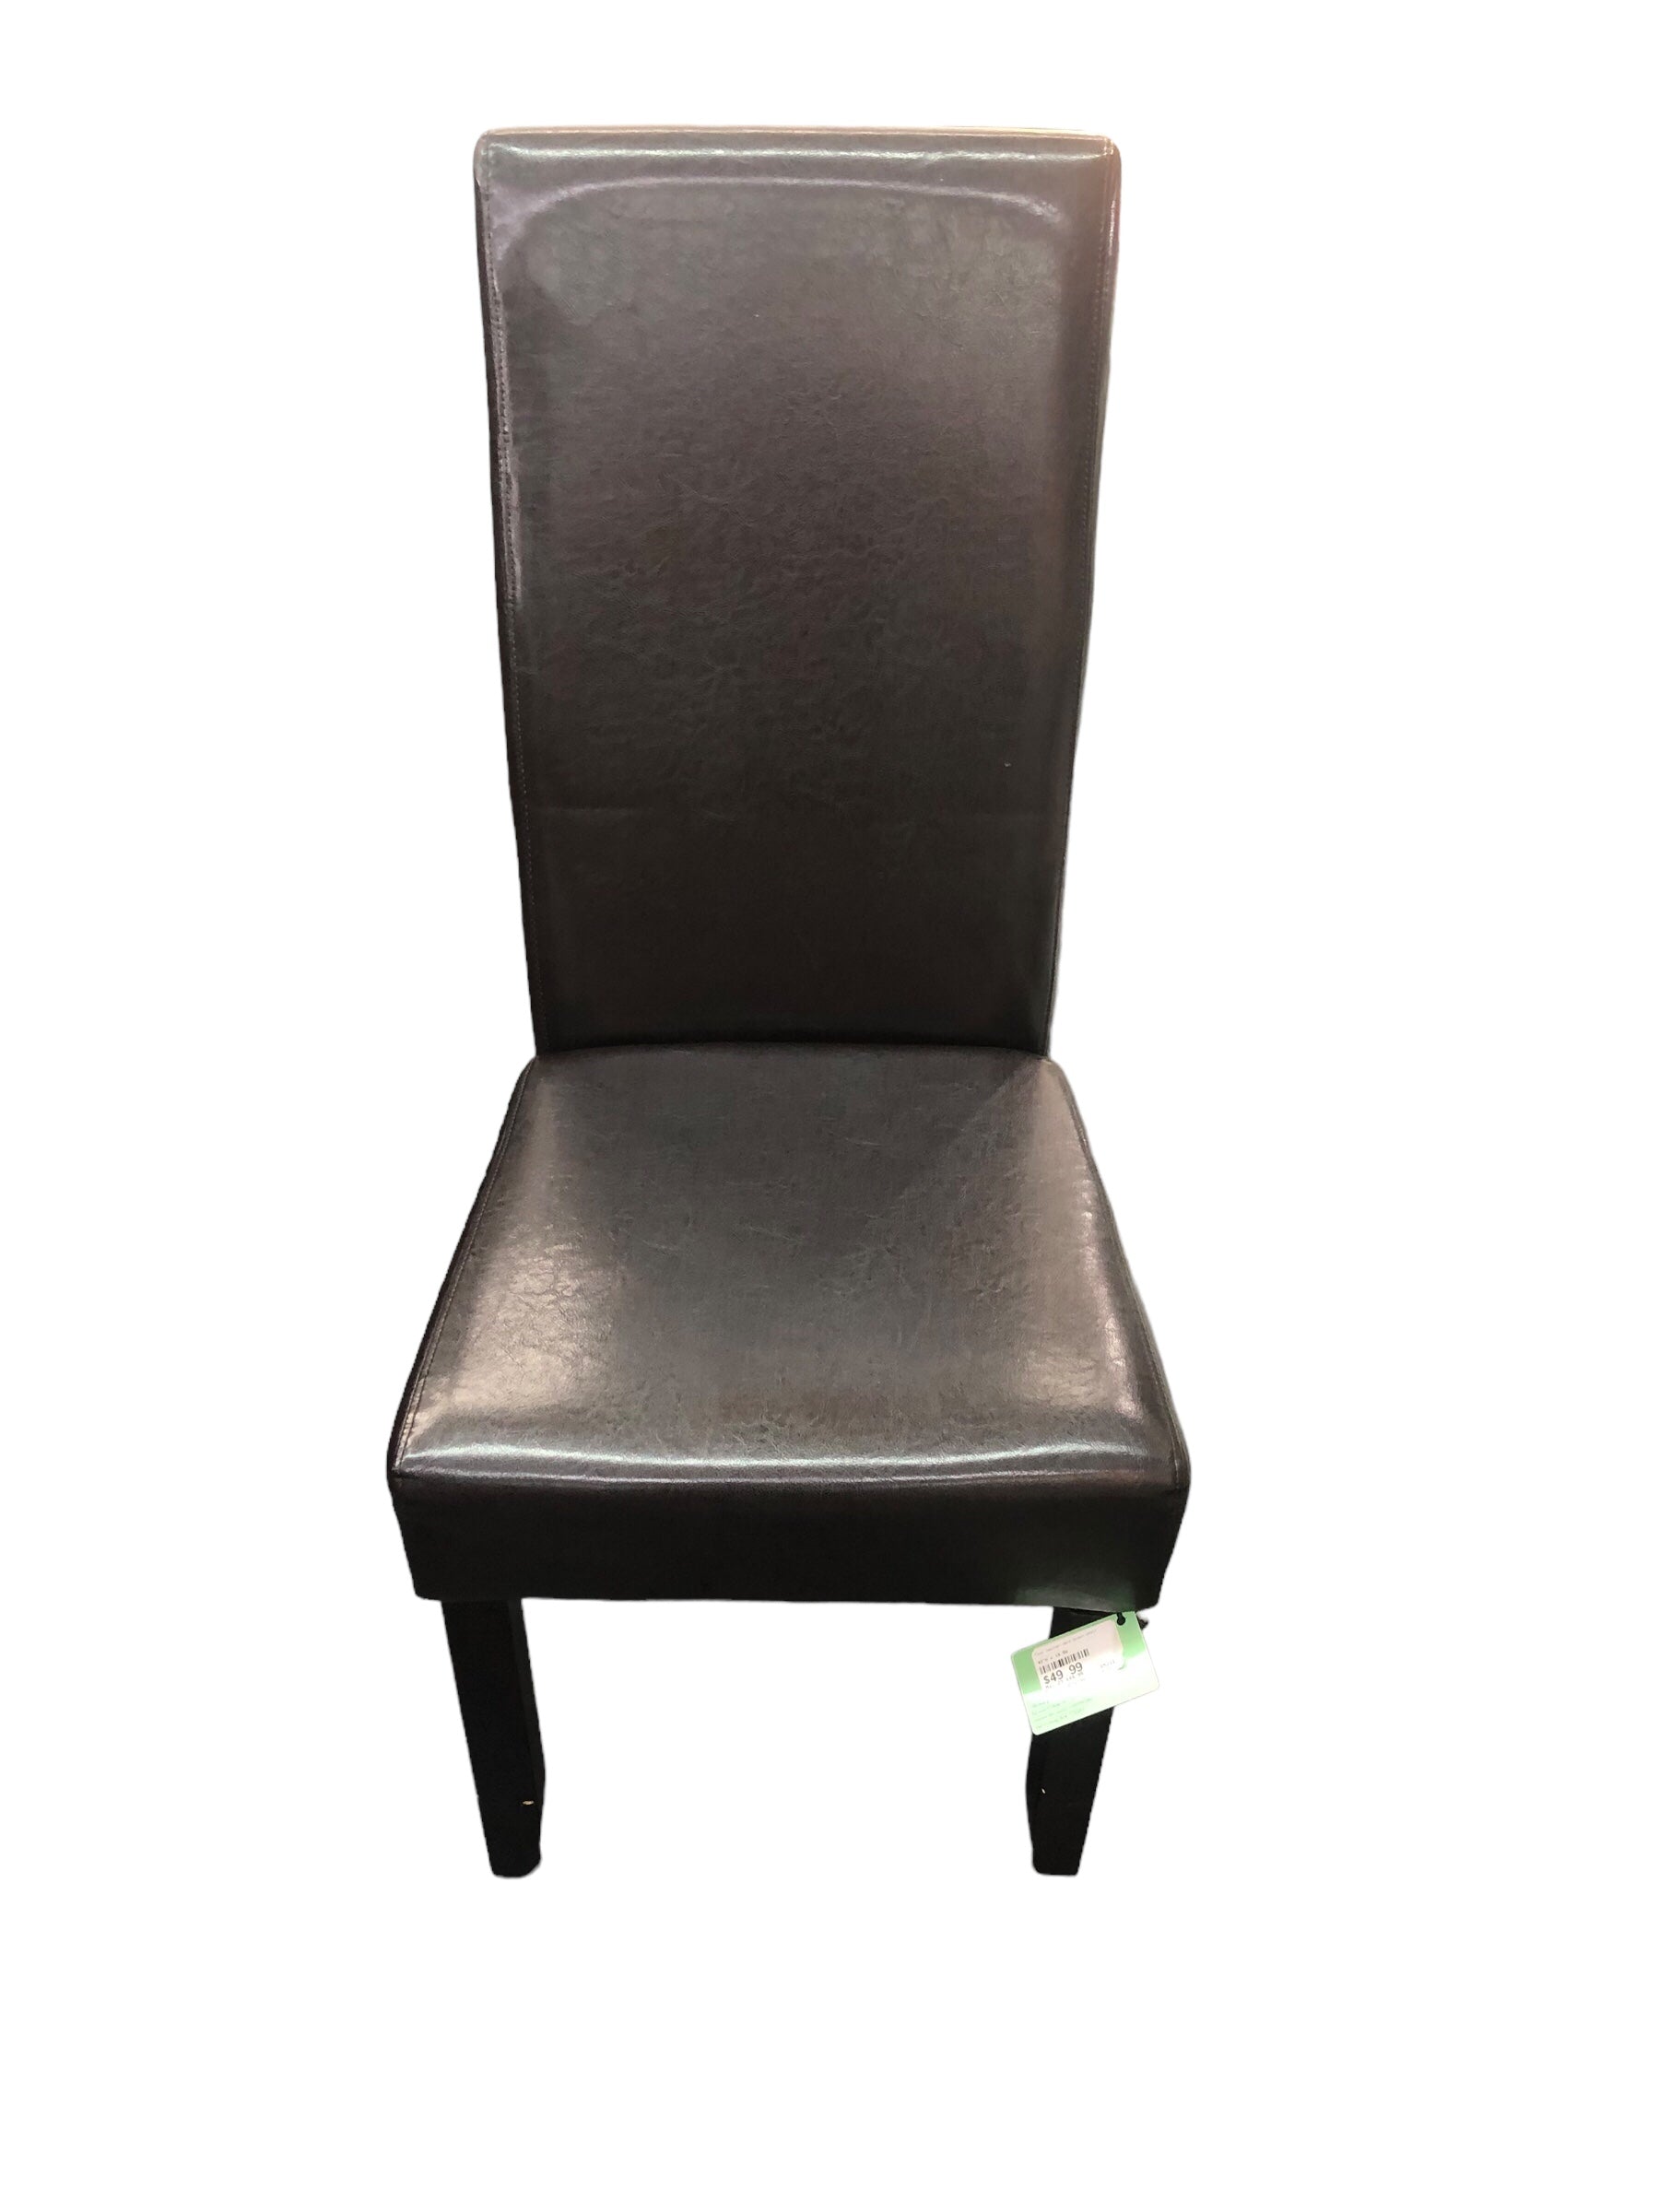 Faux leather dark brown chair